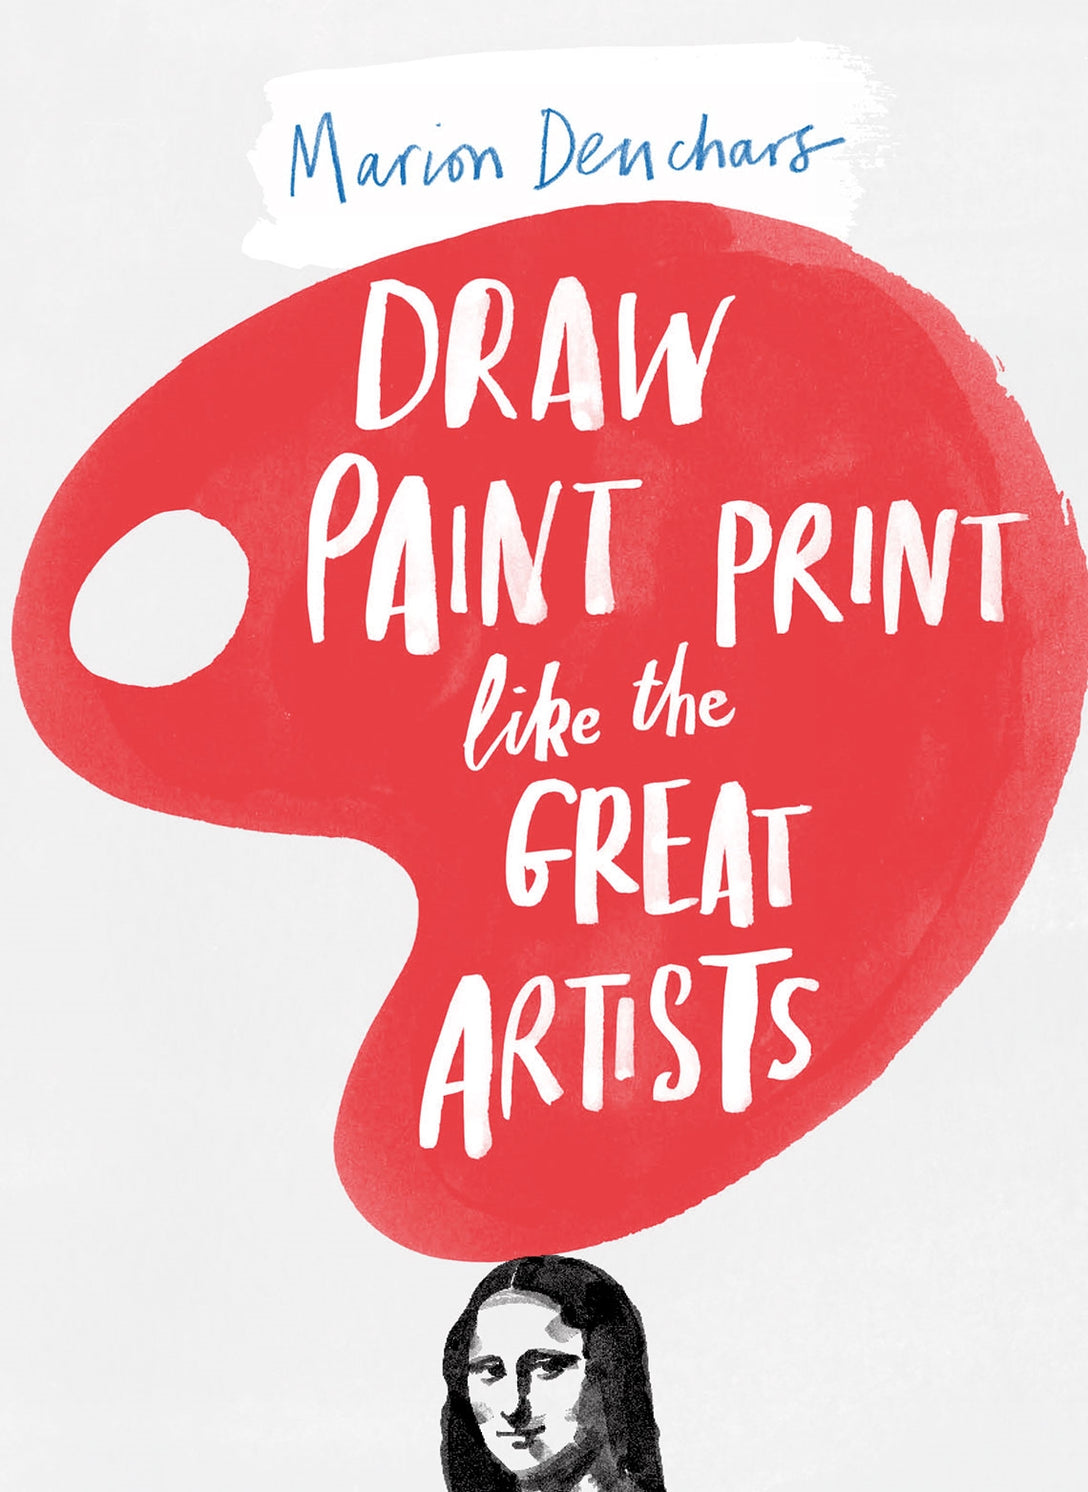 Draw Paint Print like the Great Artists by Marion Deuchars